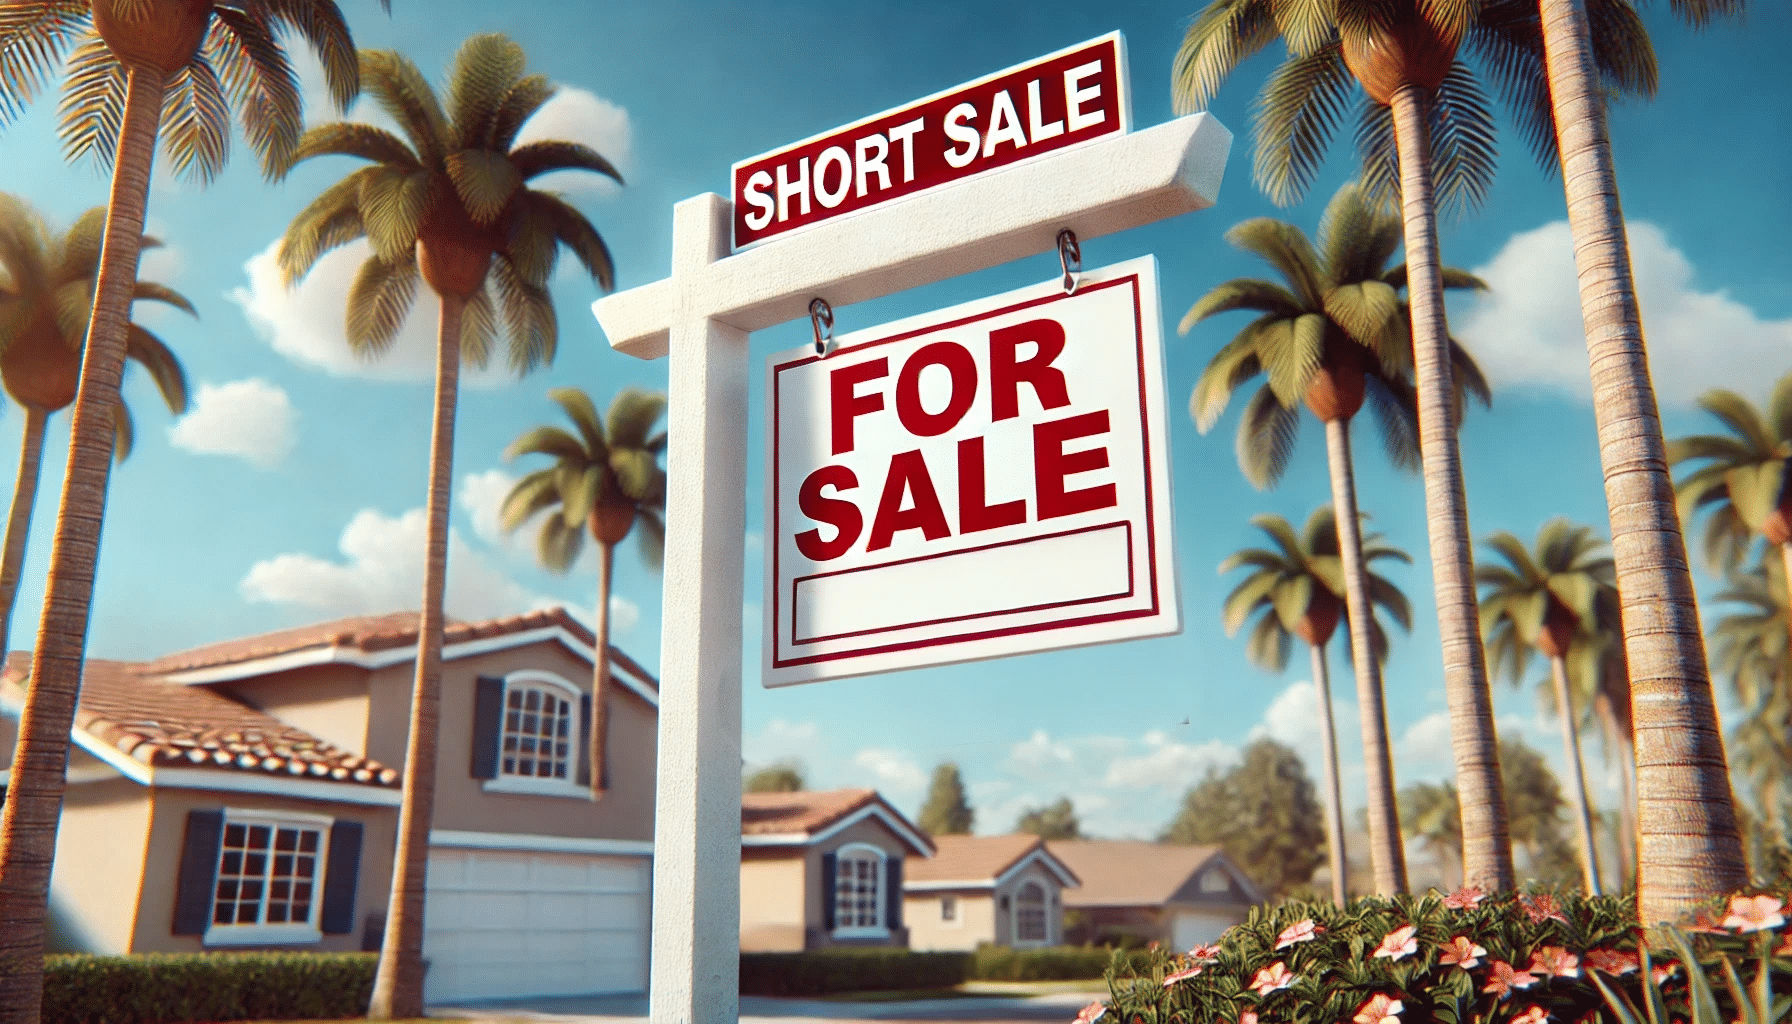 Buying a Short Sale Home